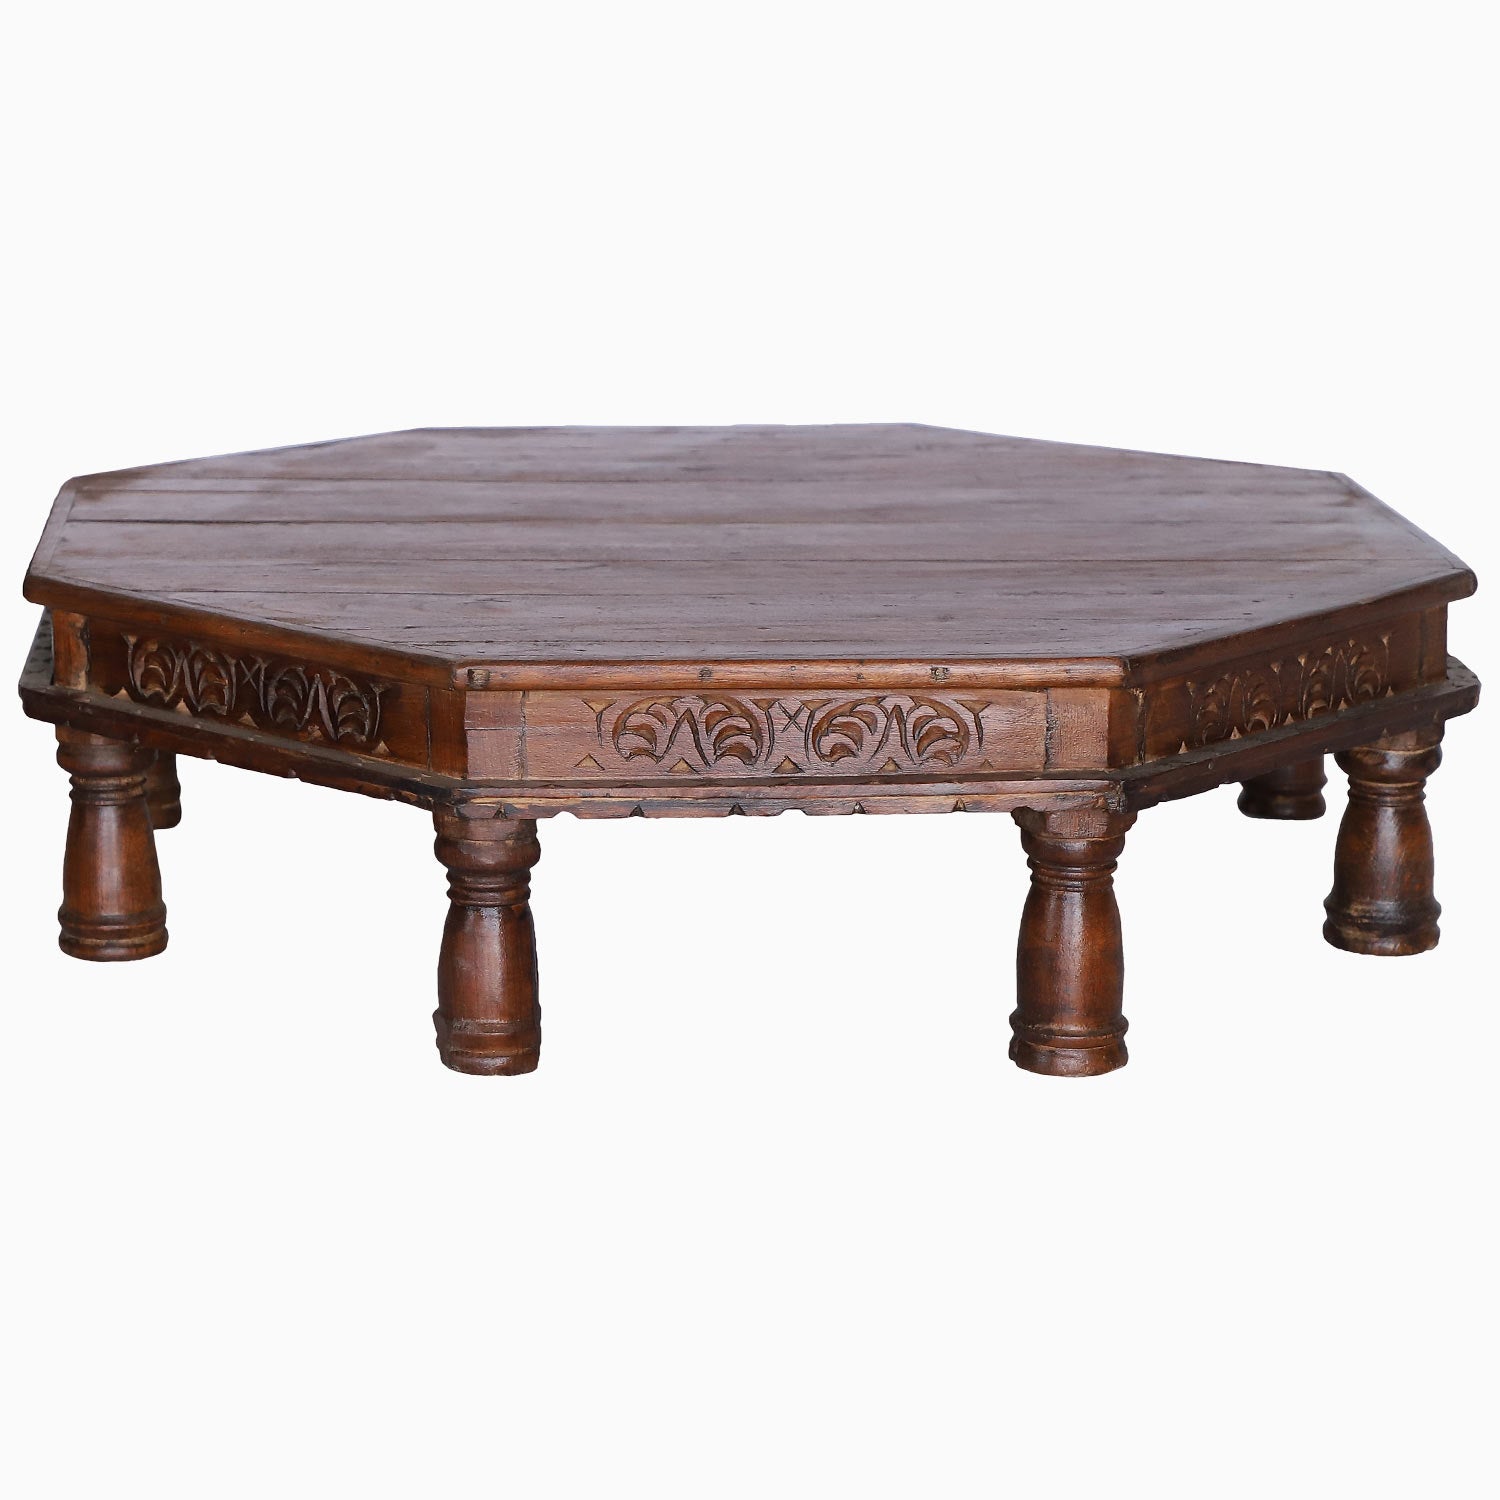 Round Wooden Carved Bajot Main